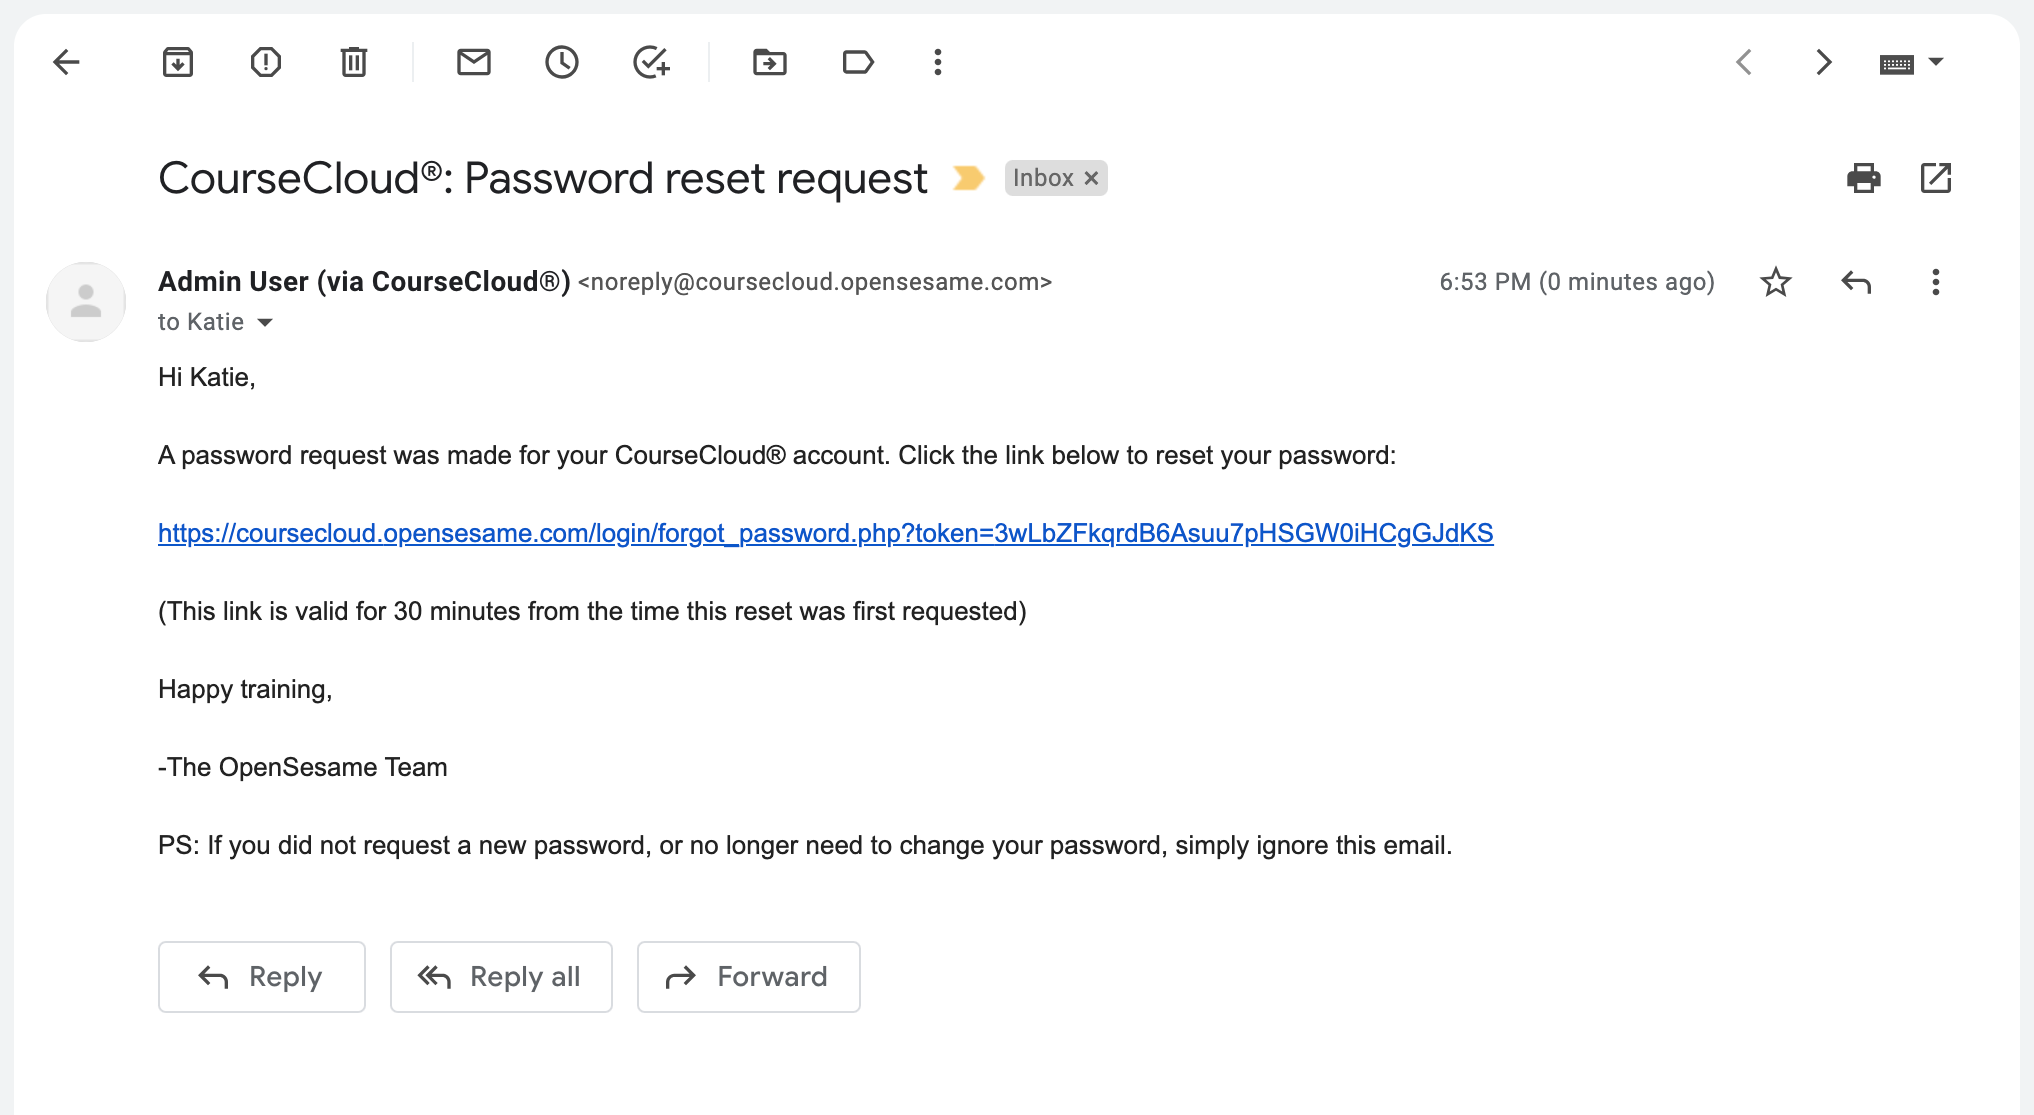 4_-_Example_email_with_link_to_reset_the_password.png